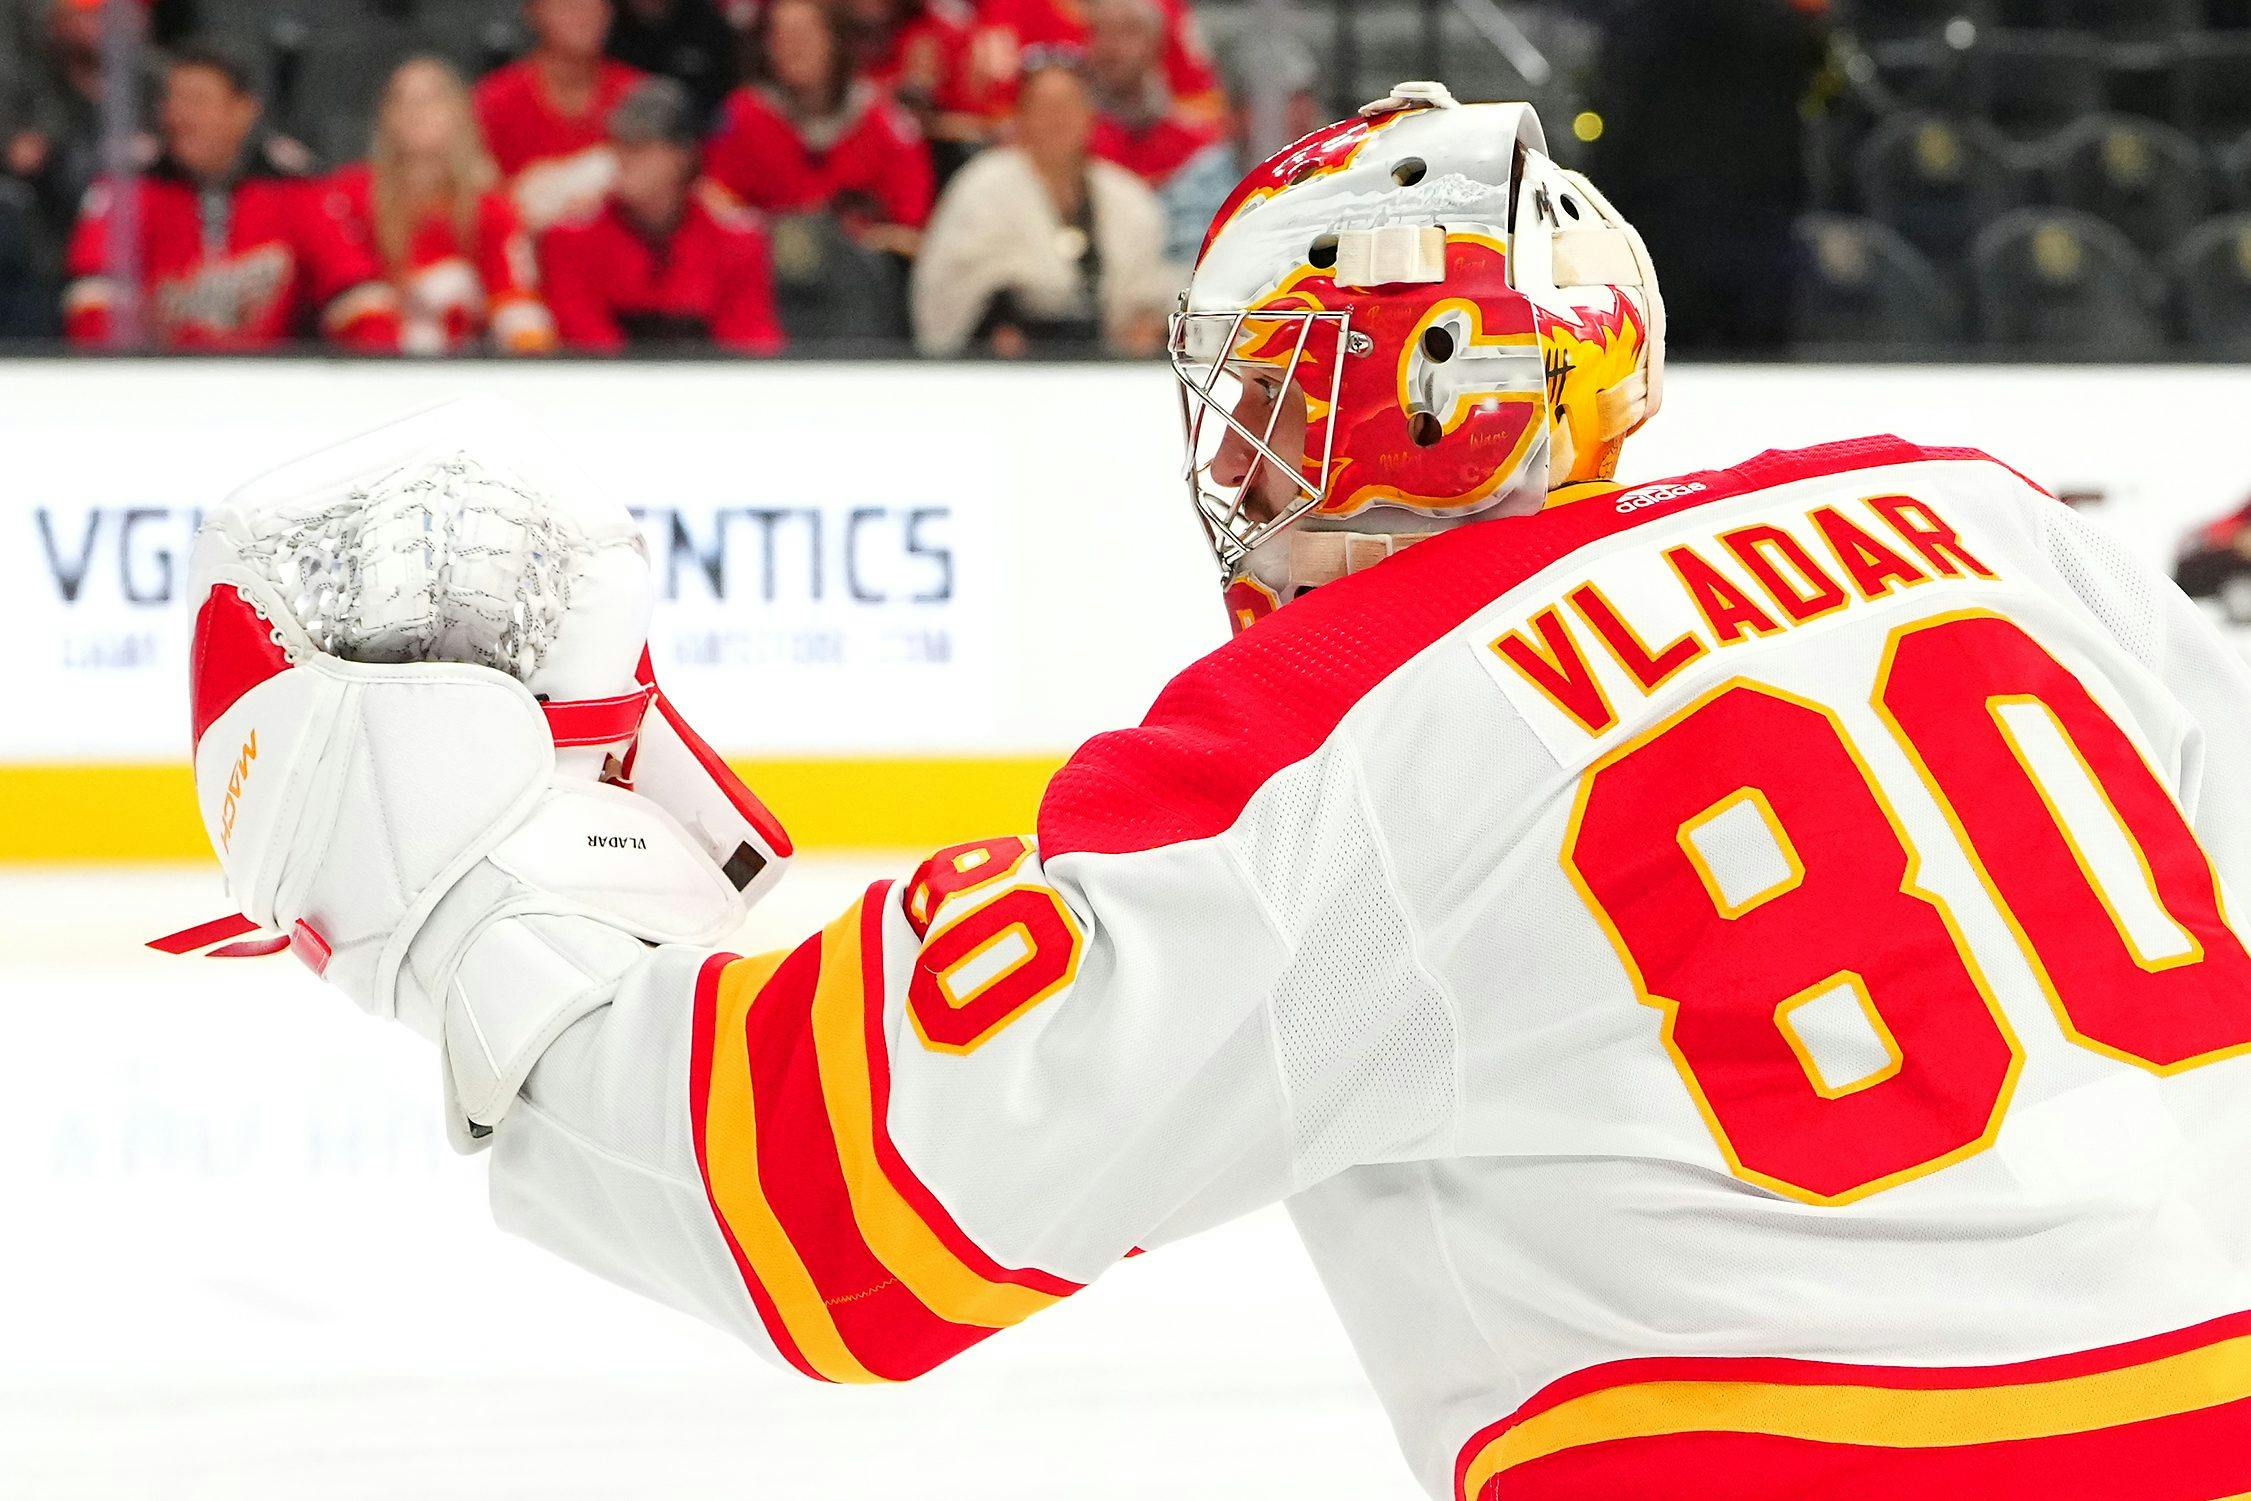 Calgary Flames activate Daniel Vladar from injured reserve, call up Dryden Hunt